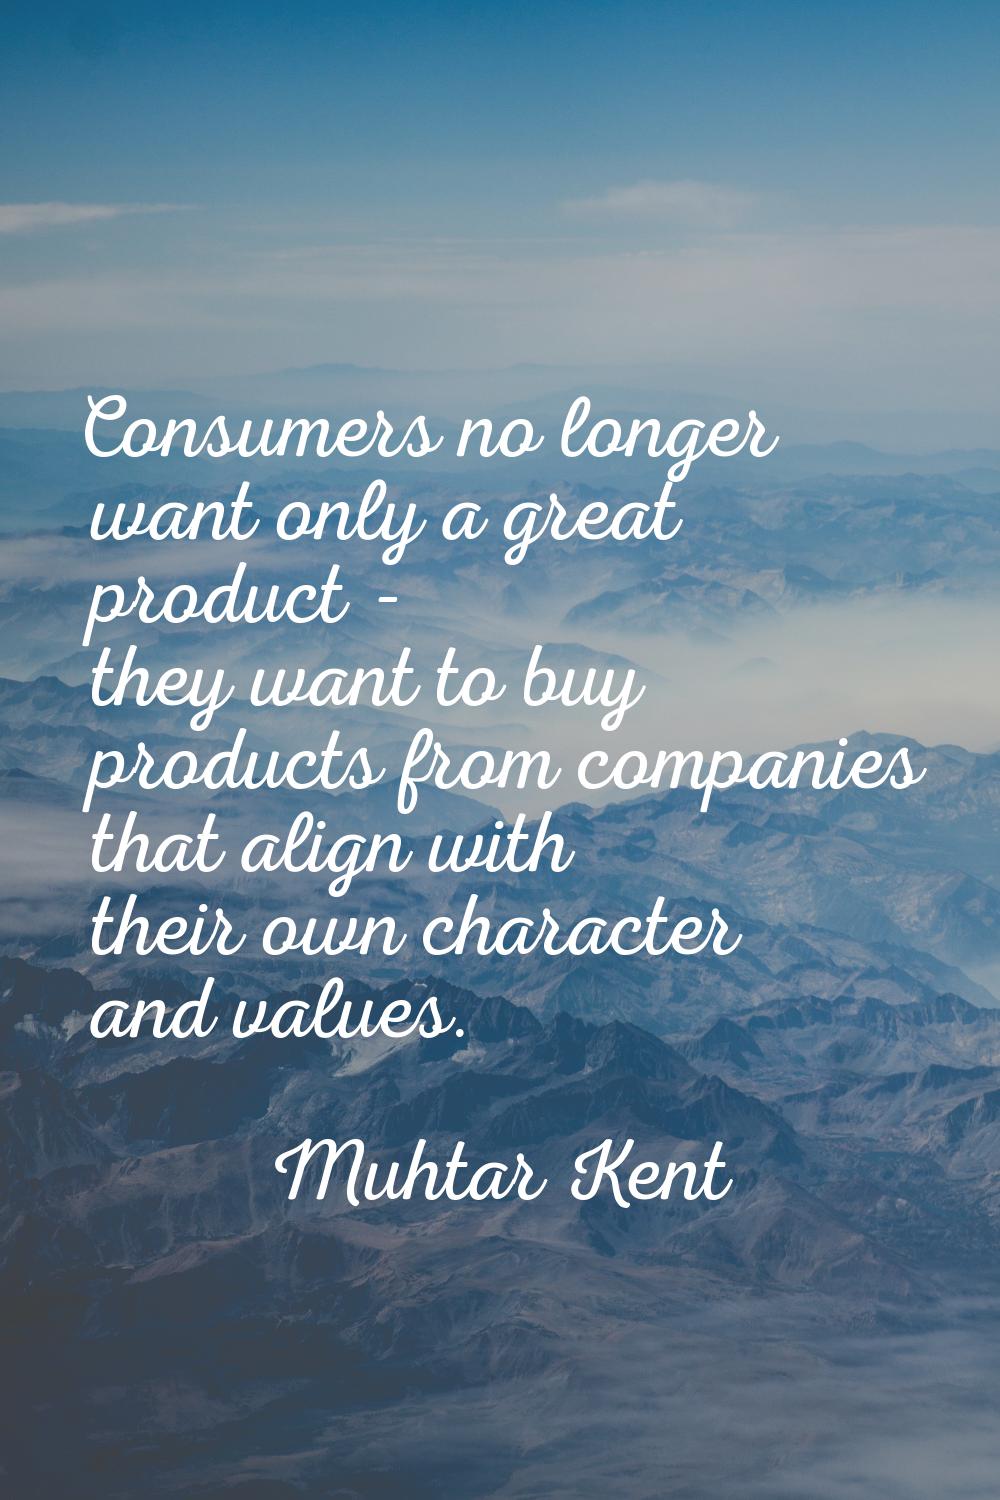 Consumers no longer want only a great product - they want to buy products from companies that align